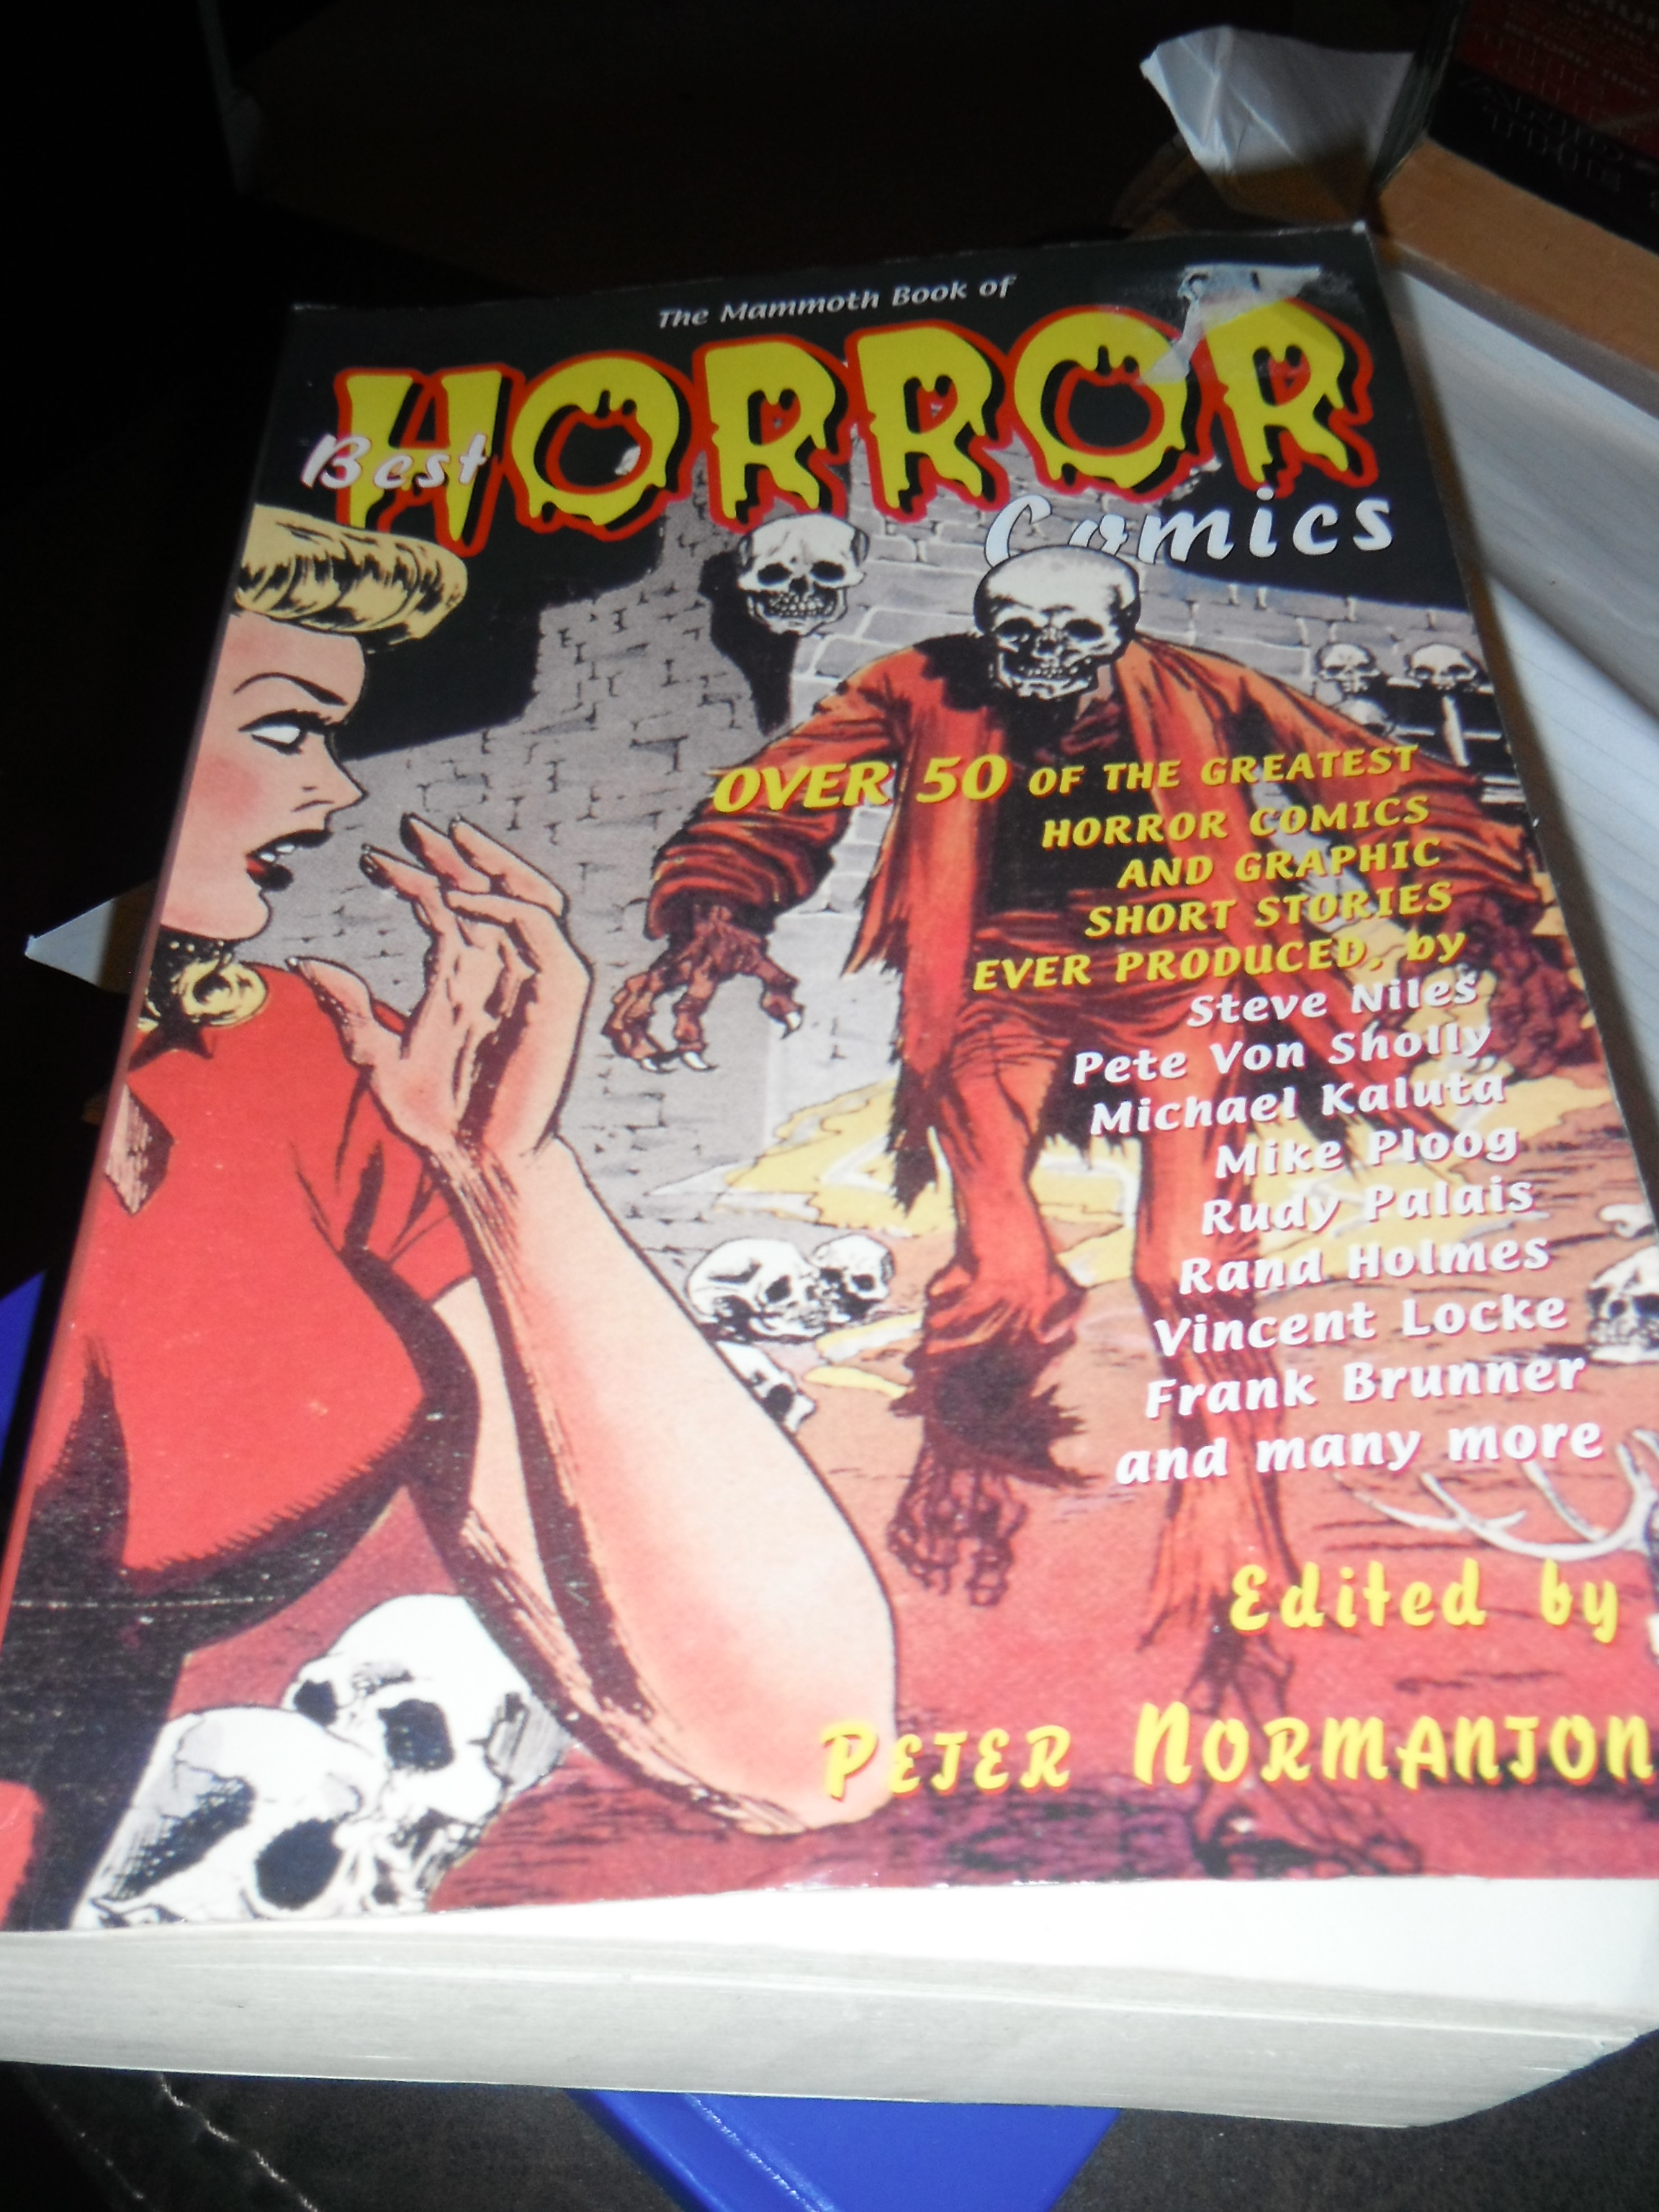 Photo taken by me – horror book cover 